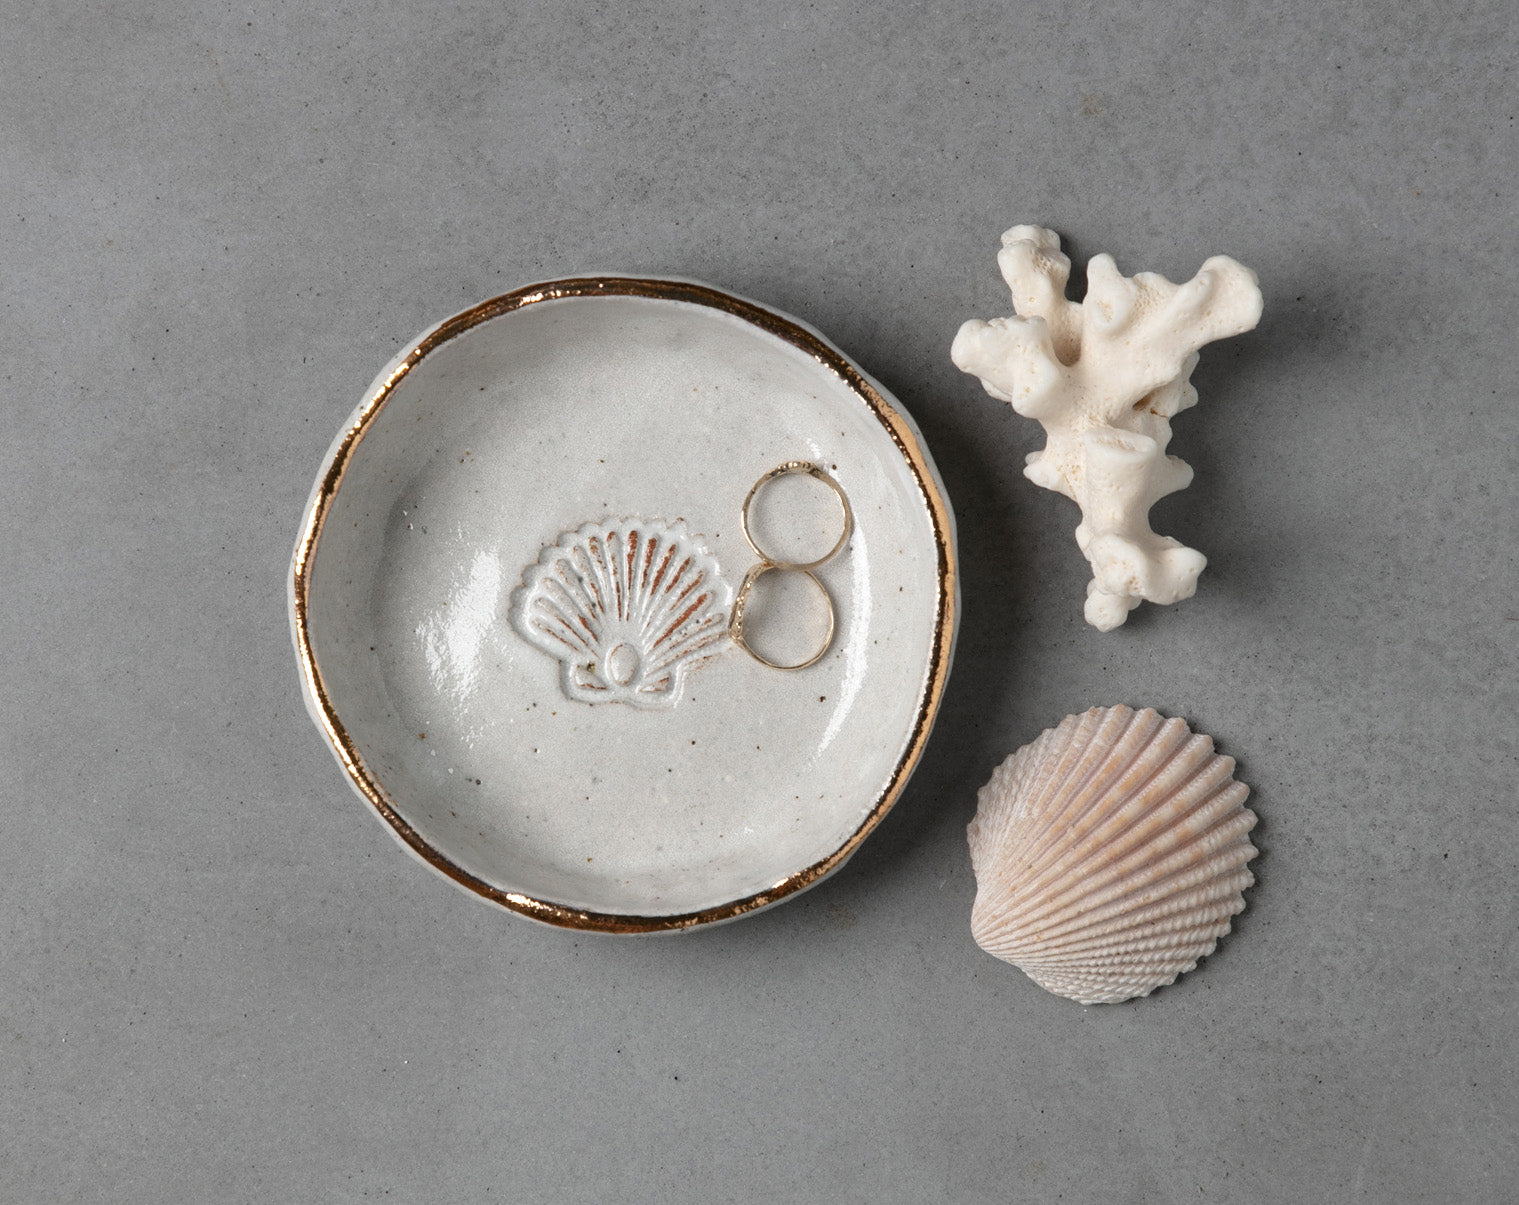 SCALLOP SHELL BOWL - SANDY CLAY